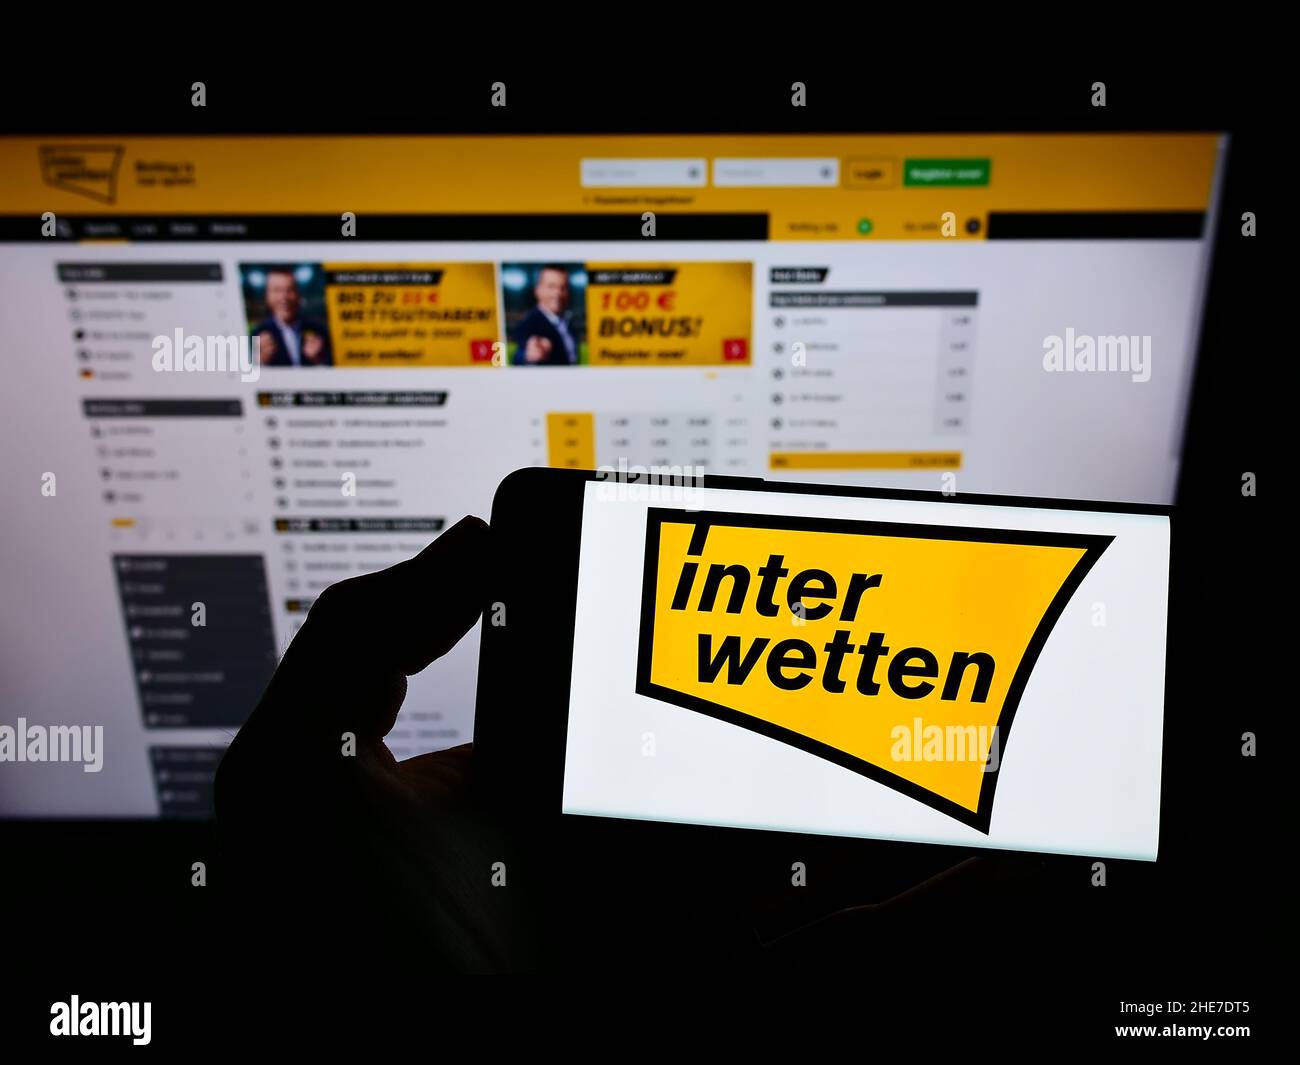 Person holding mobile phone with logo of sports betting company Interwetten Ltd. on screen in front of business web page. Focus on phone display. Stock Photo